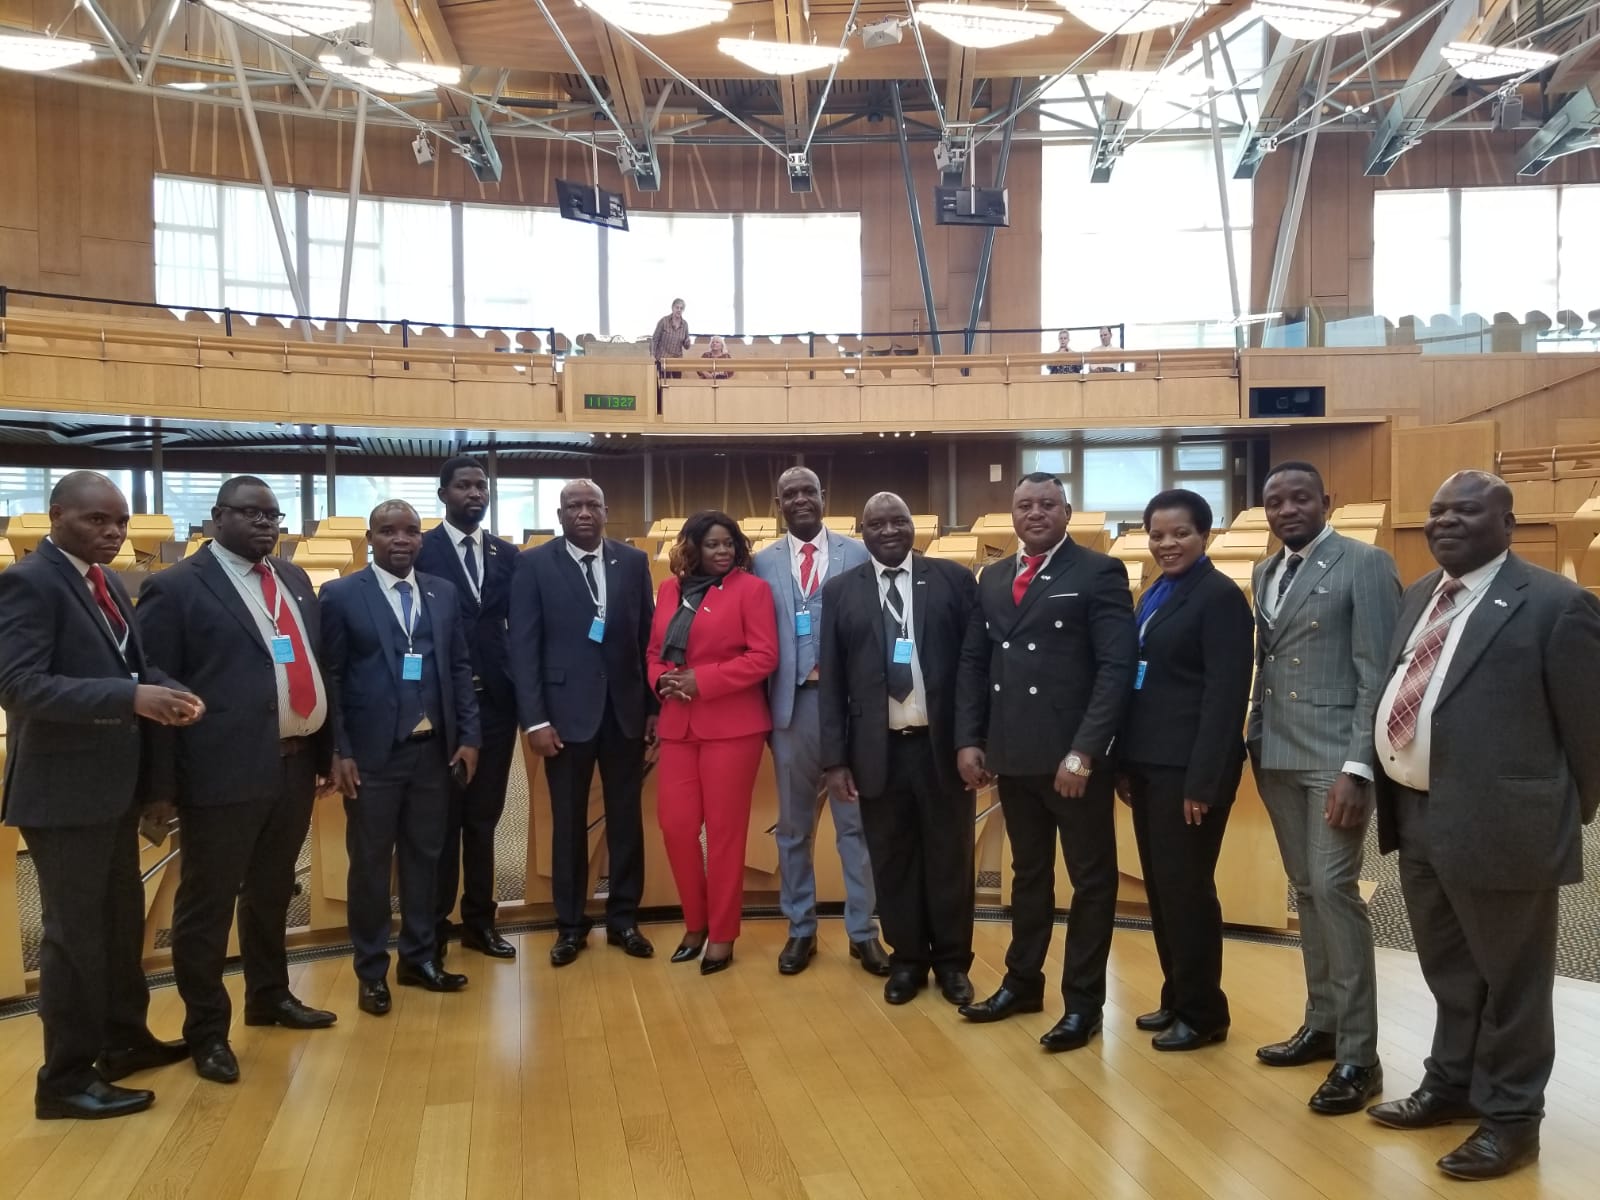 CP4D Malawi Delegates in Scottish Parliament Chamber